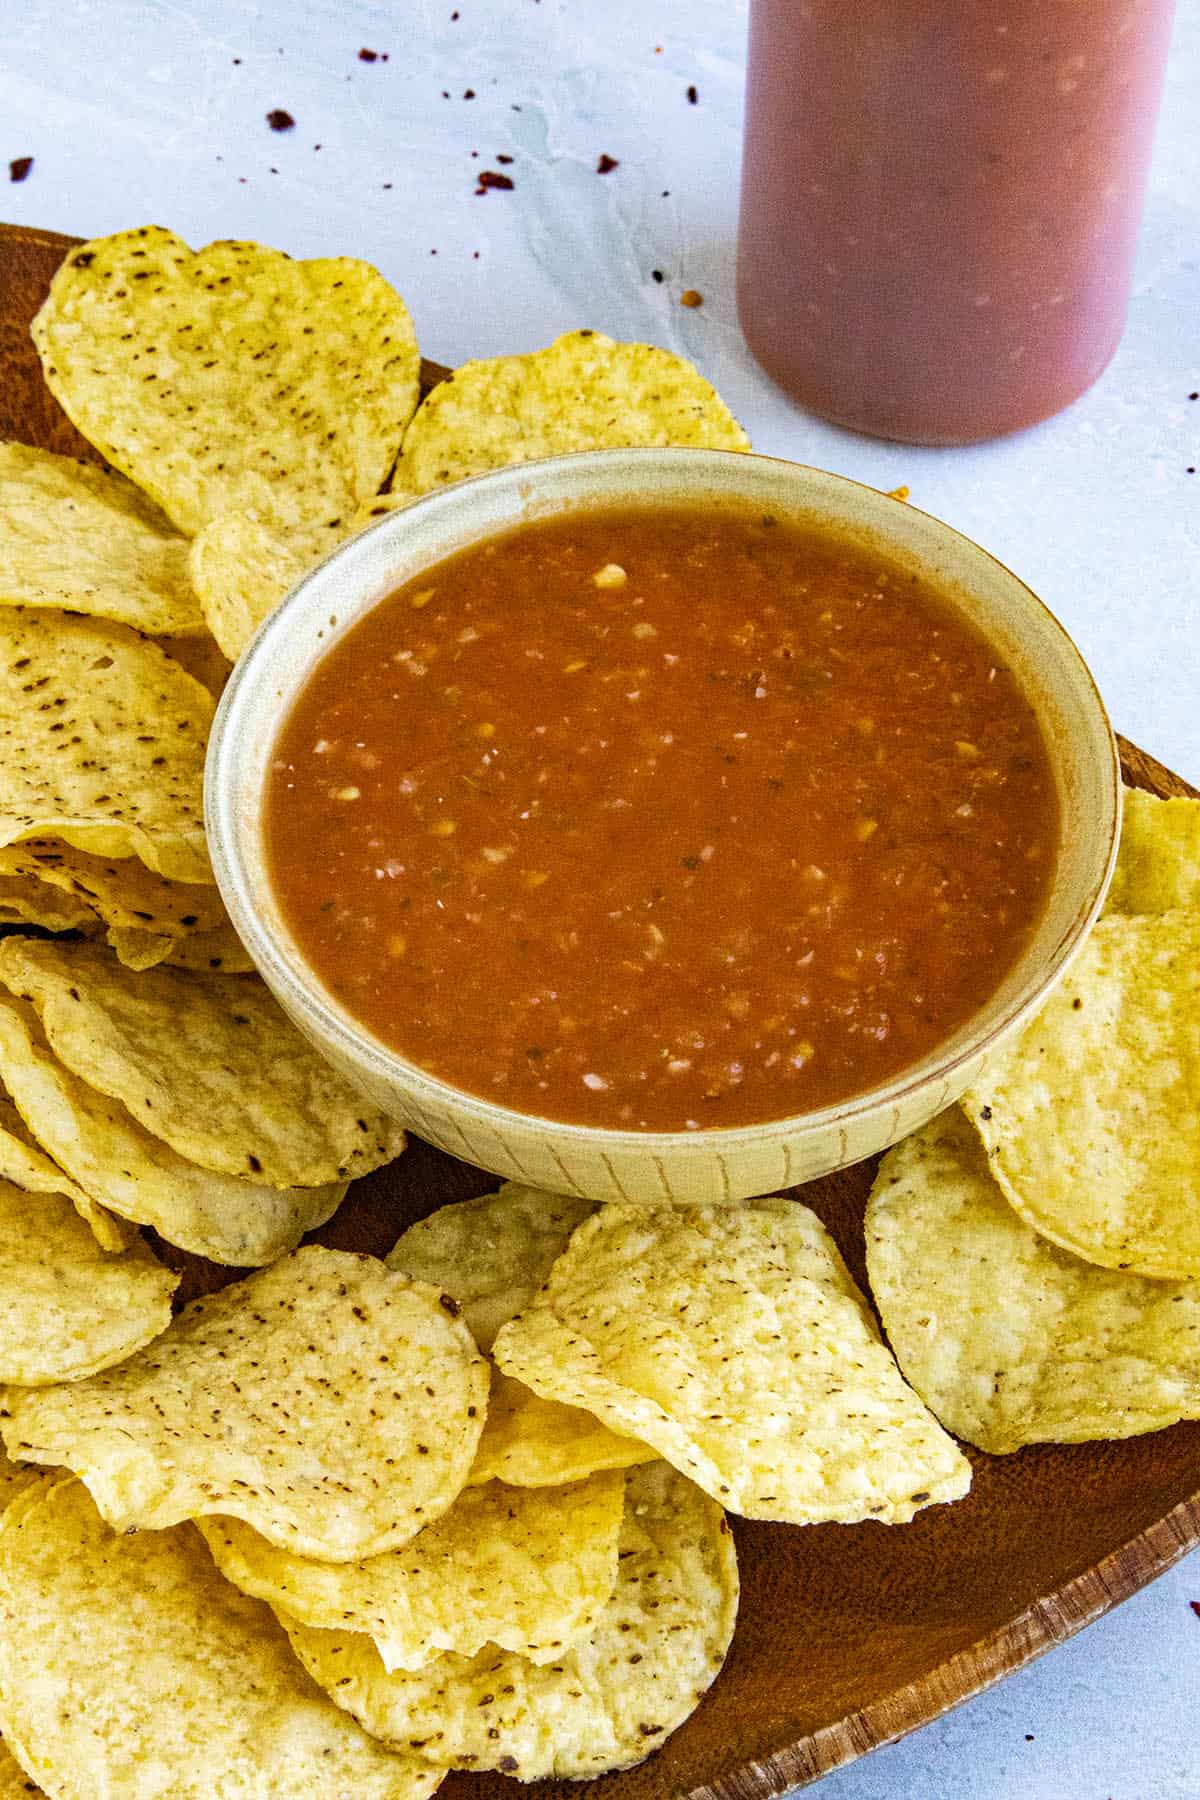 Salsa Roja, or red salsa in a bowl